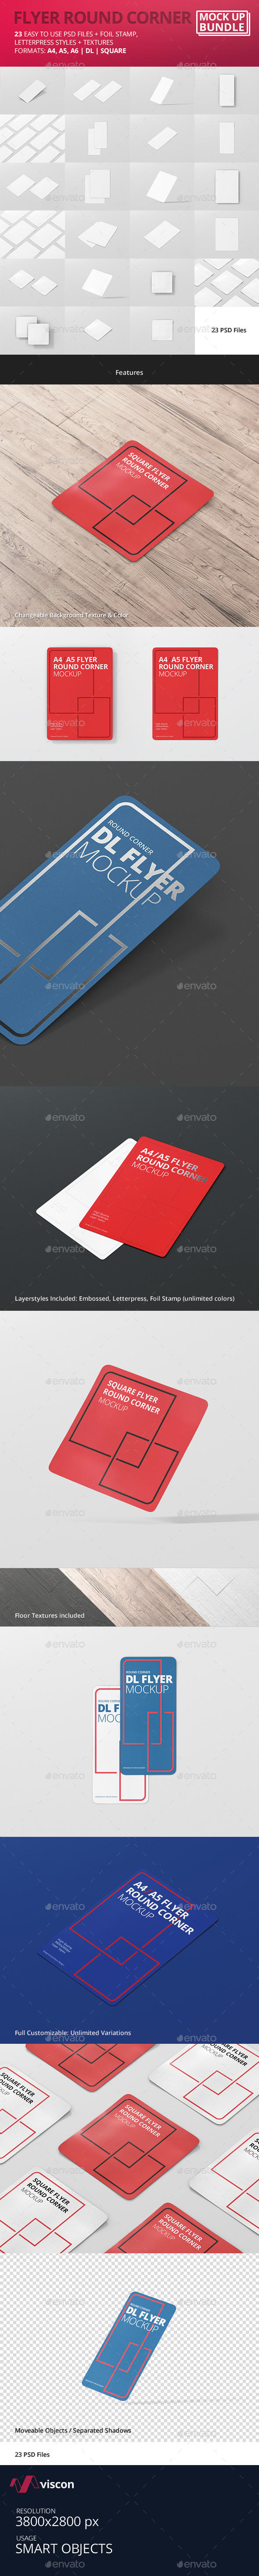 Mockup Flyer Din Graphics Designs Templates From Graphicriver